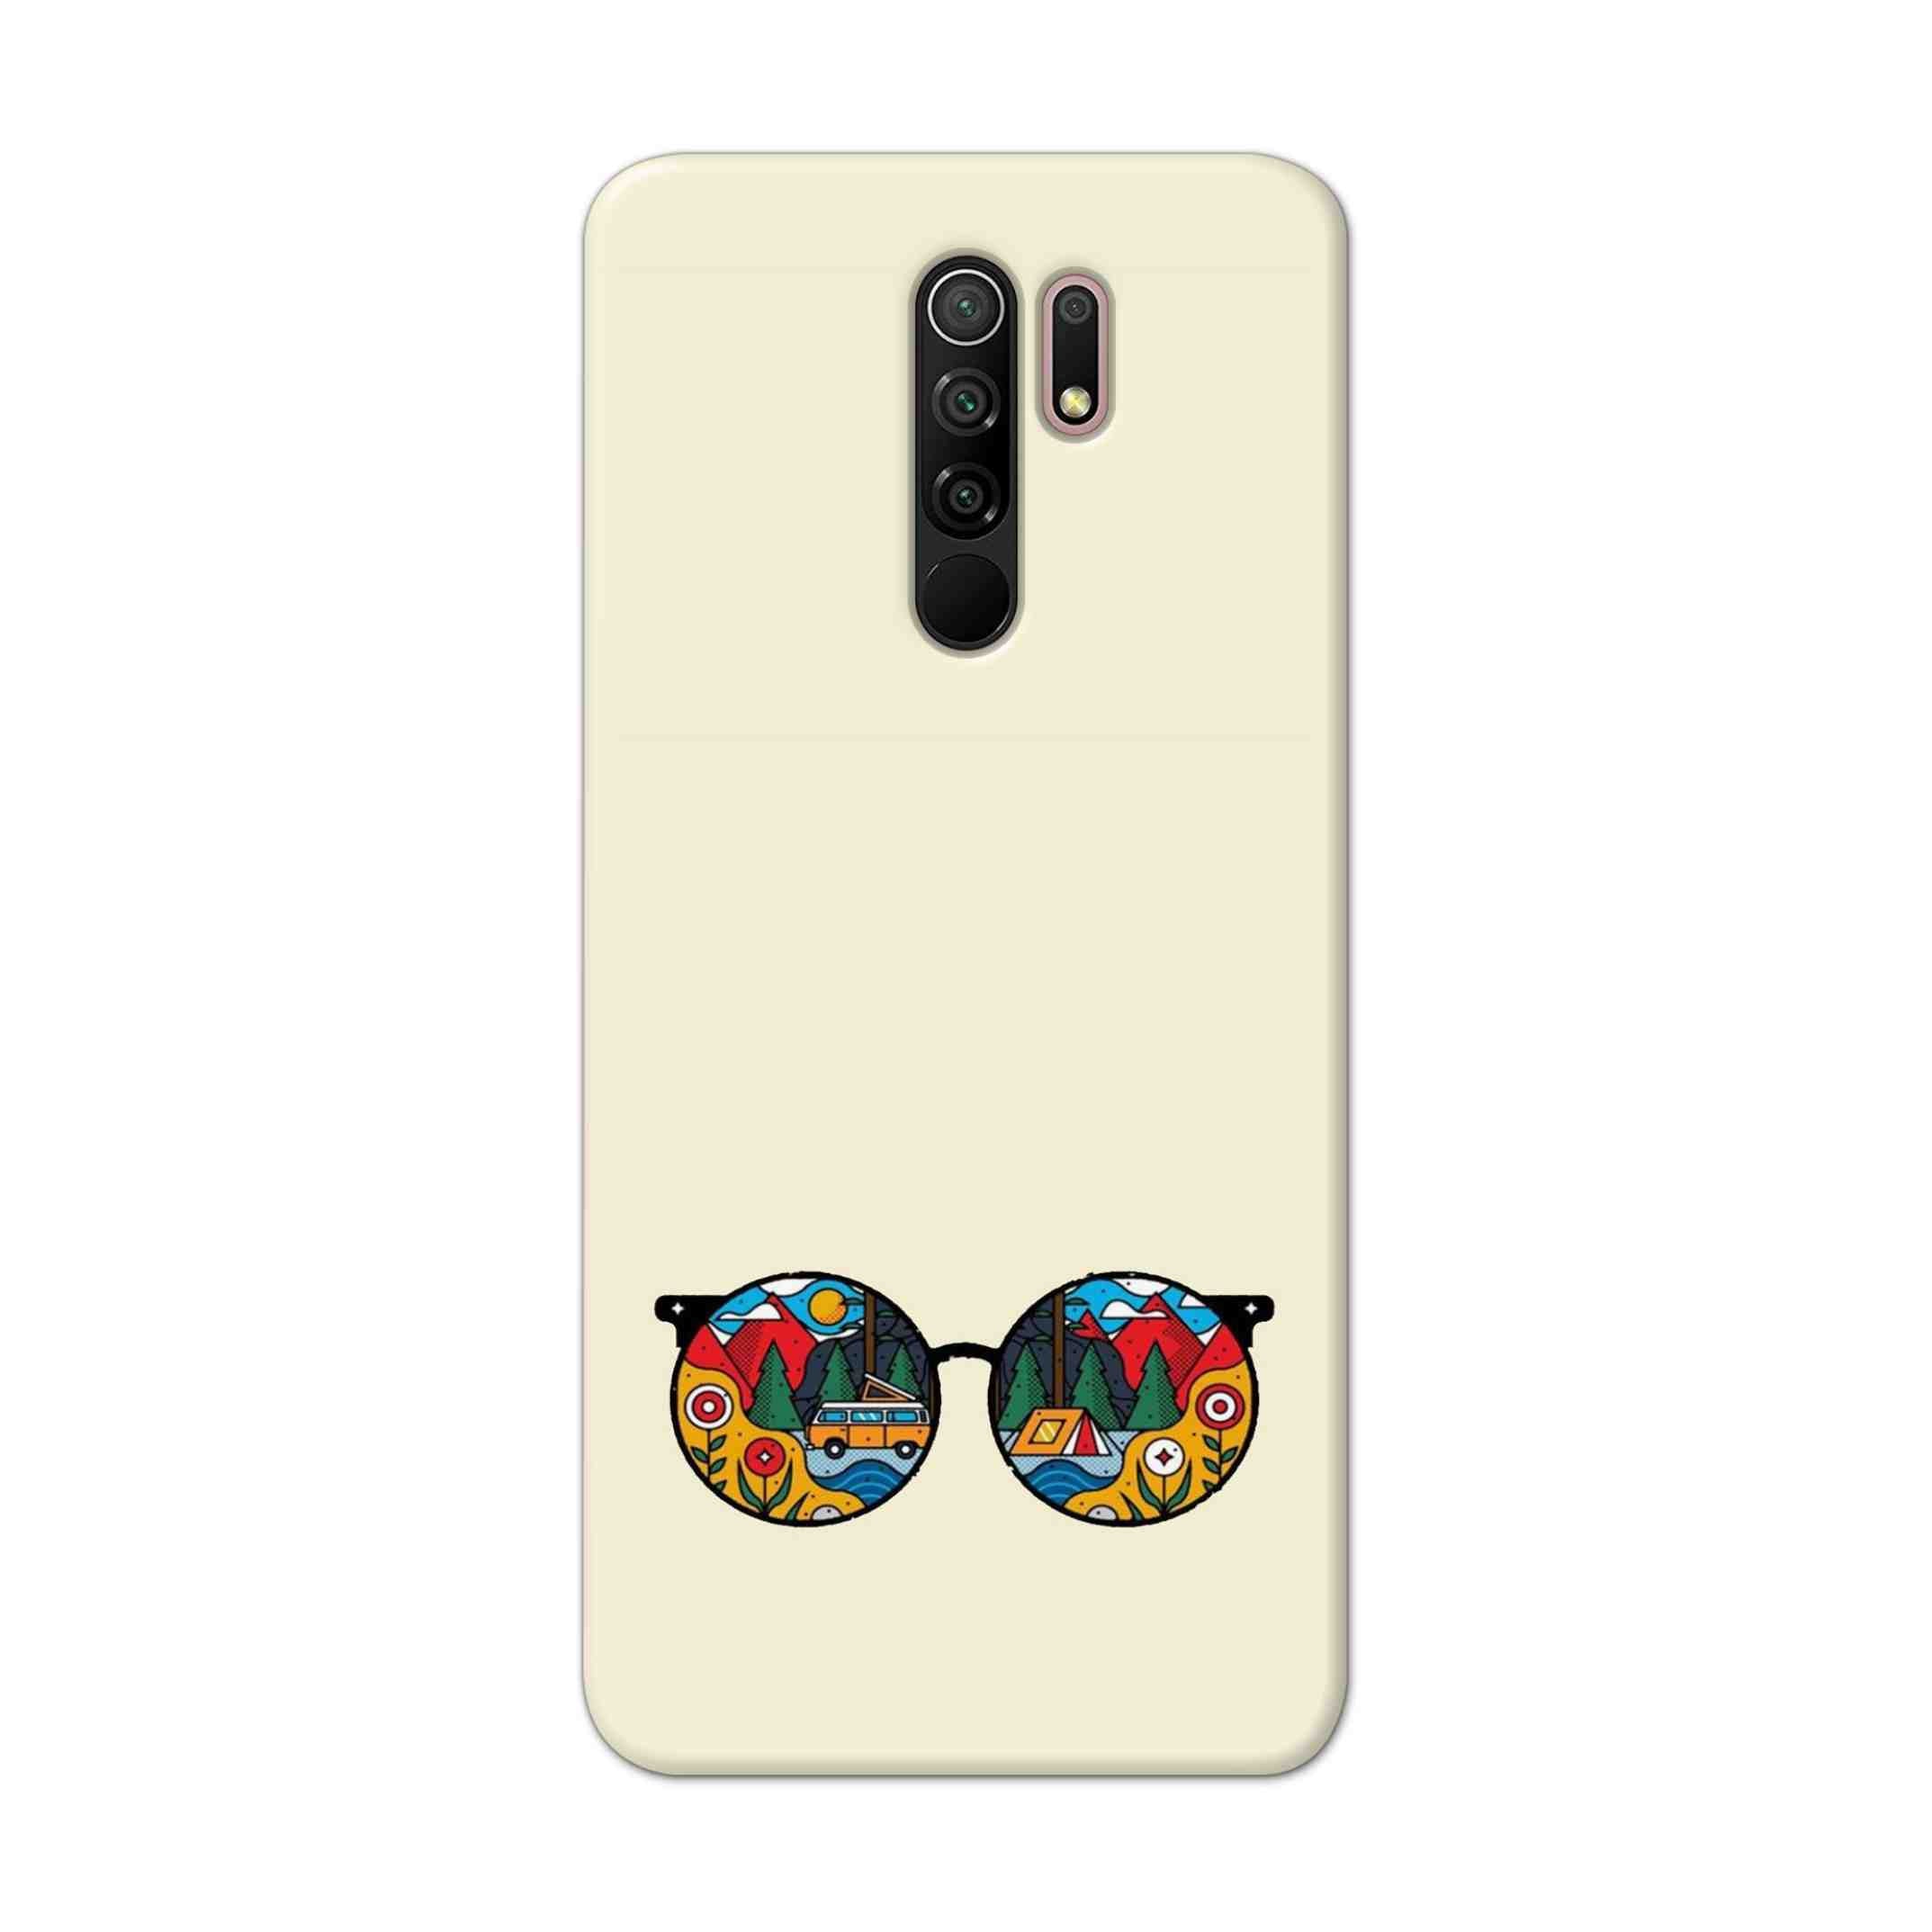 Buy Rainbow Sunglasses Hard Back Mobile Phone Case Cover For Xiaomi Redmi 9 Prime Online